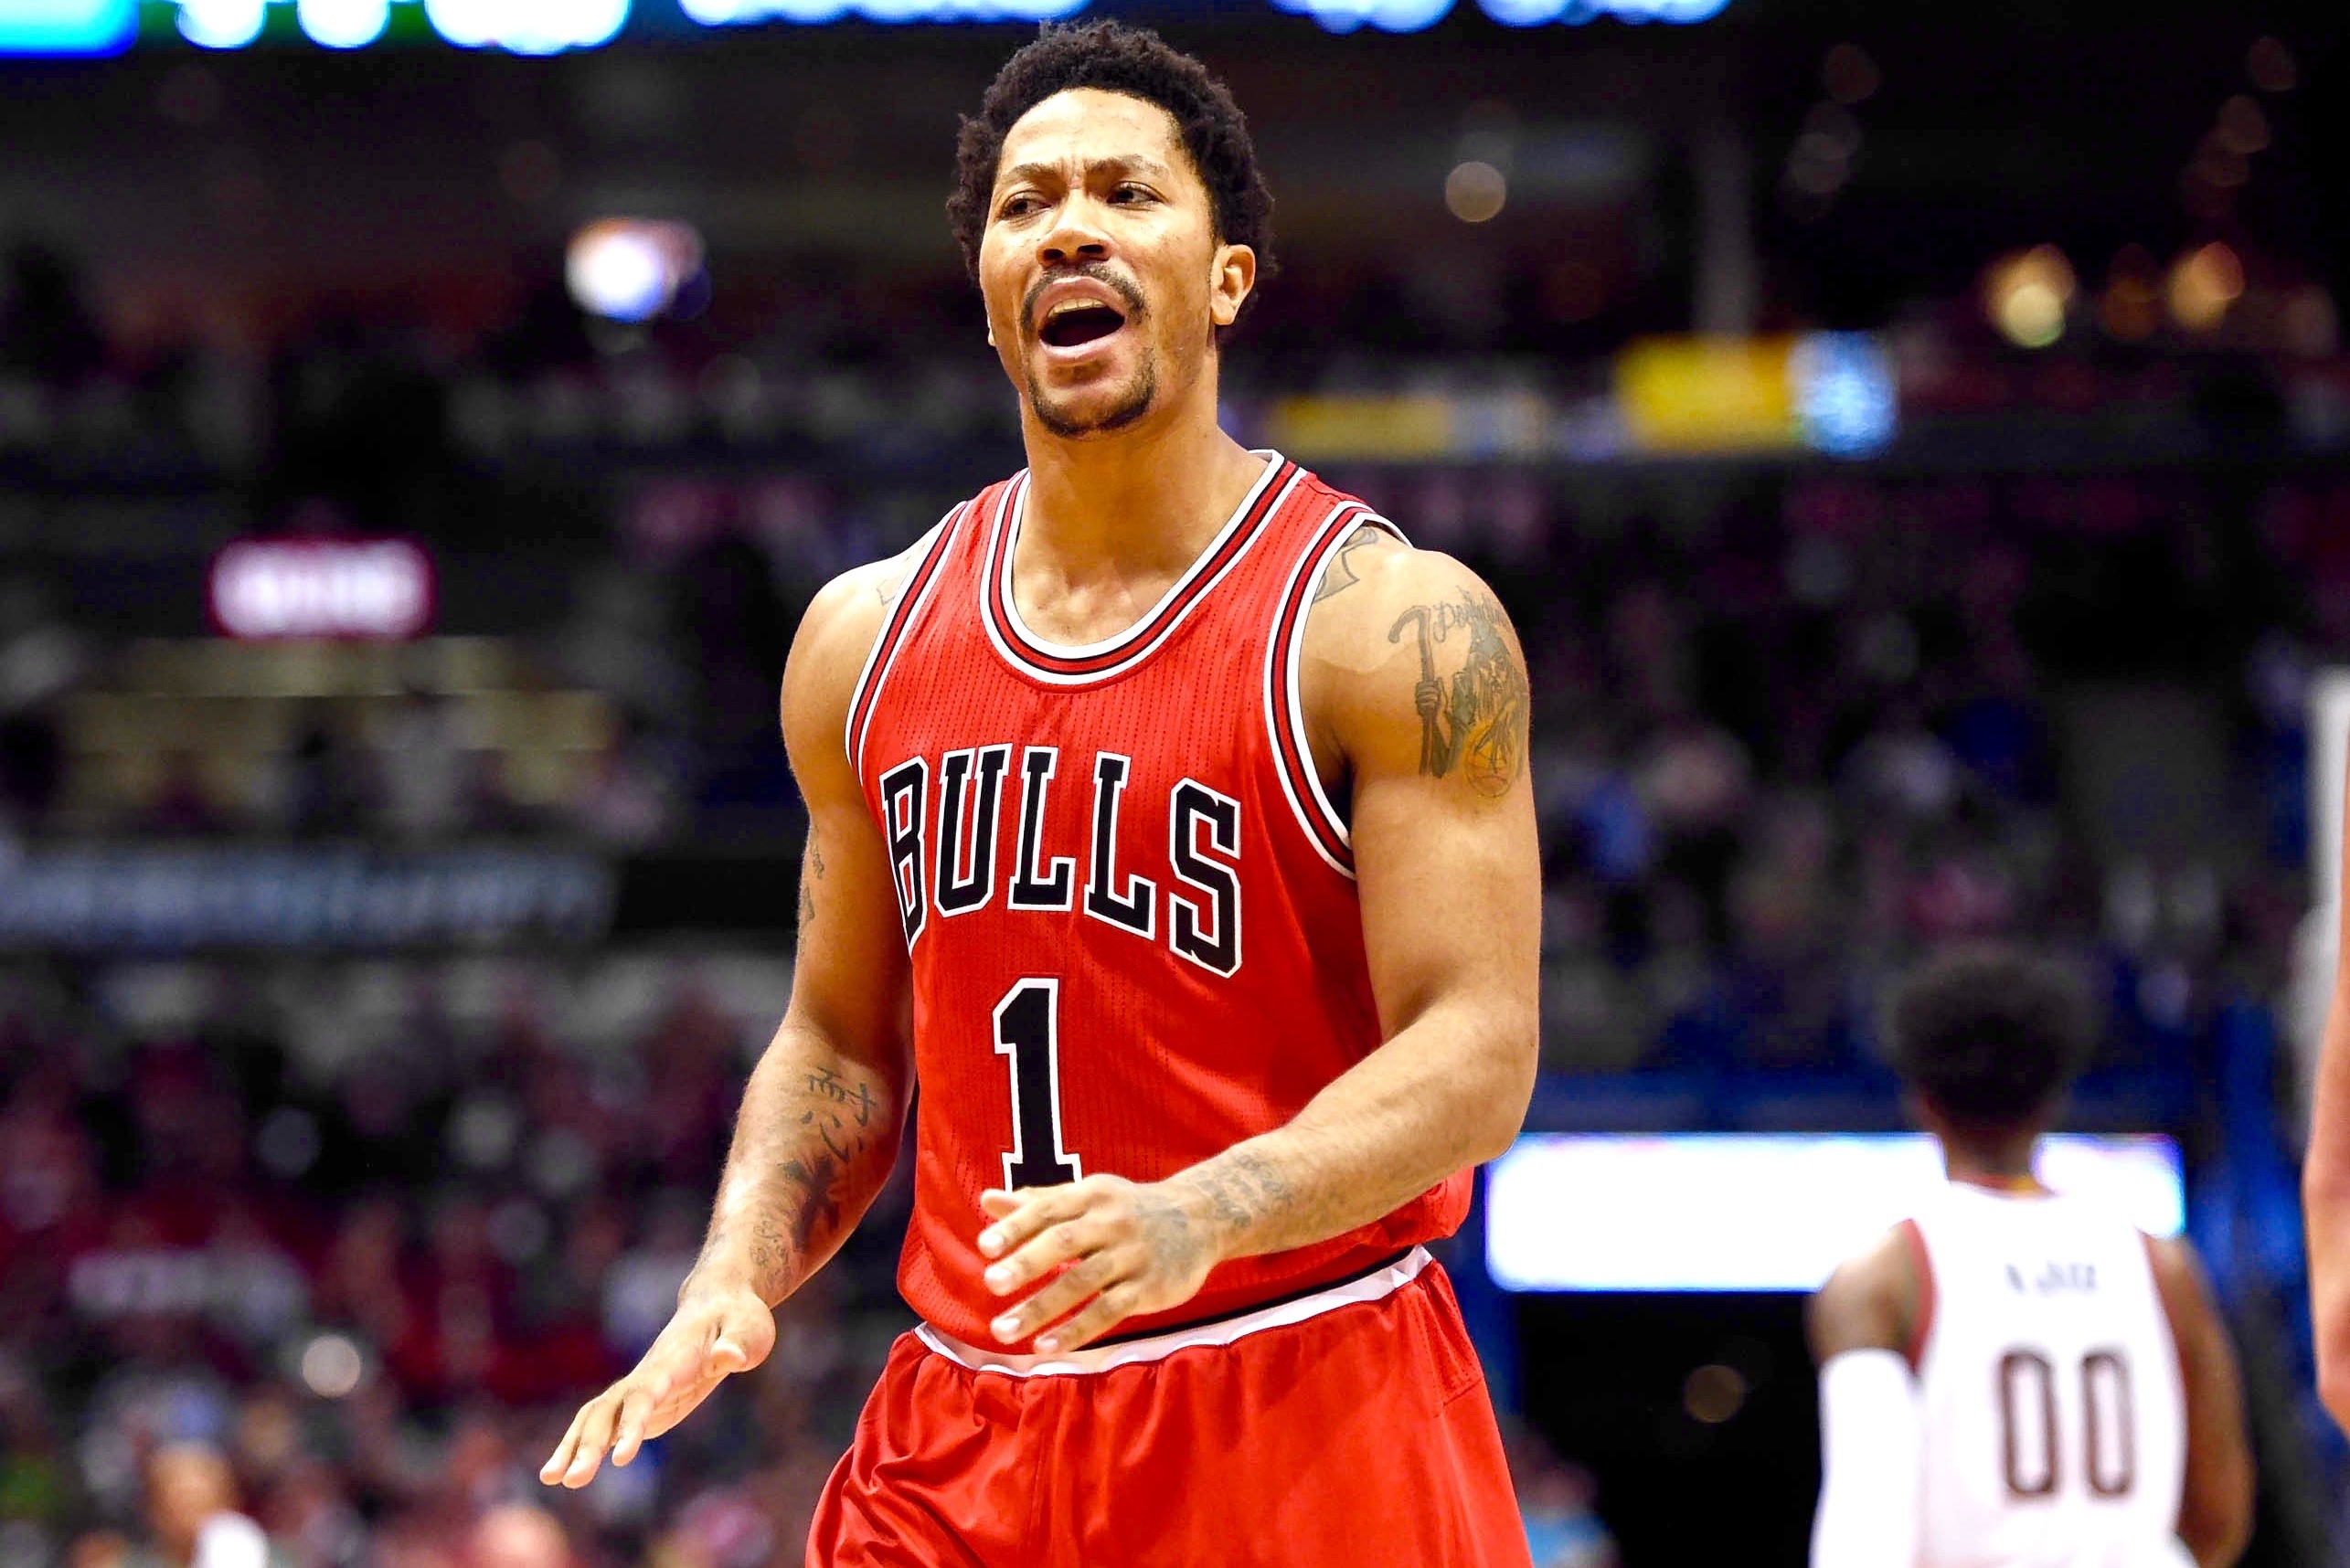 Chicago Bulls star Derrick Rose out for season with latest knee injury